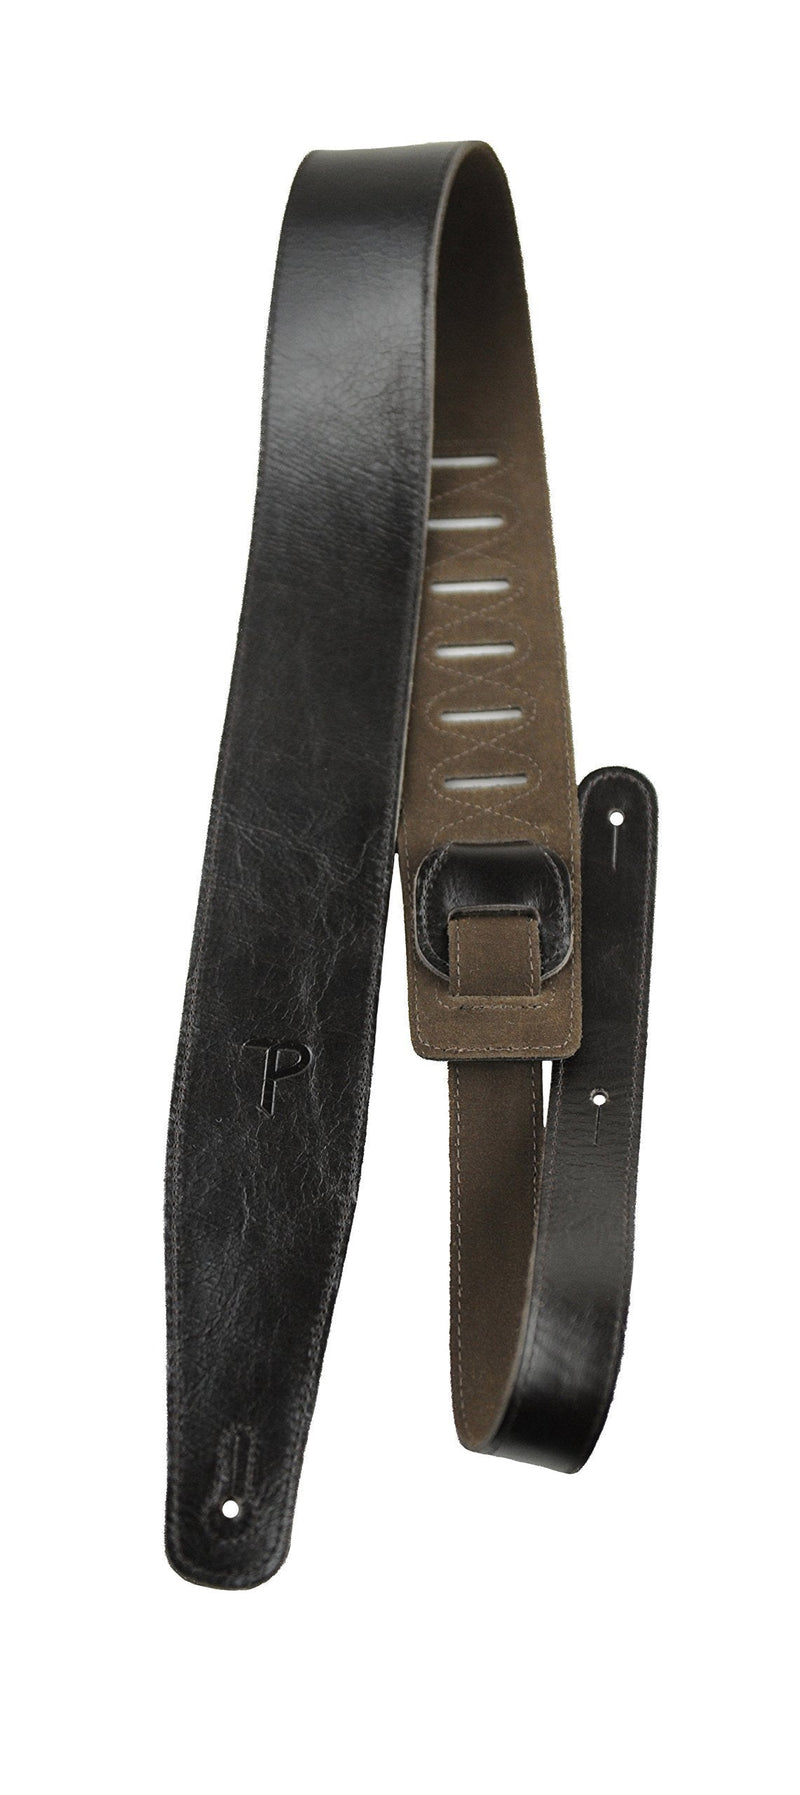 Perri’s Leathers Ltd. - Guitar Strap - The Africa Collection - Black - Adjustable - For Acoustic/Bass/Electric Guitars - Made in Canada (AFR25-6874)